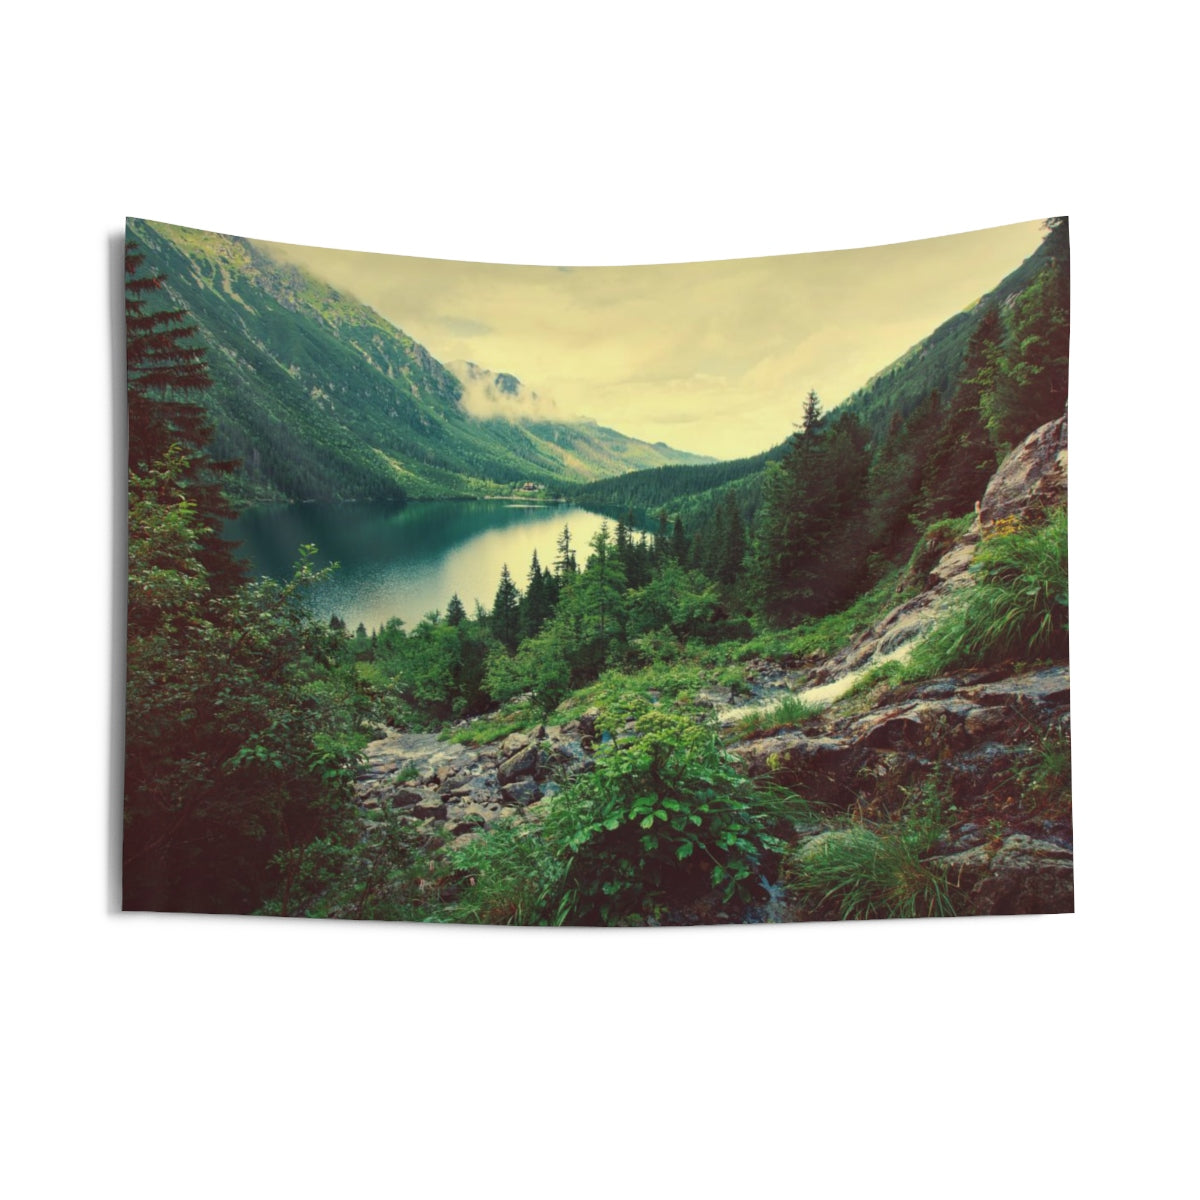 Mountain Lake Tapestry, Scenic Green Wilderness Nature Landscape Indoor Wall Art Hanging Tapestries Decor Starcove Fashion